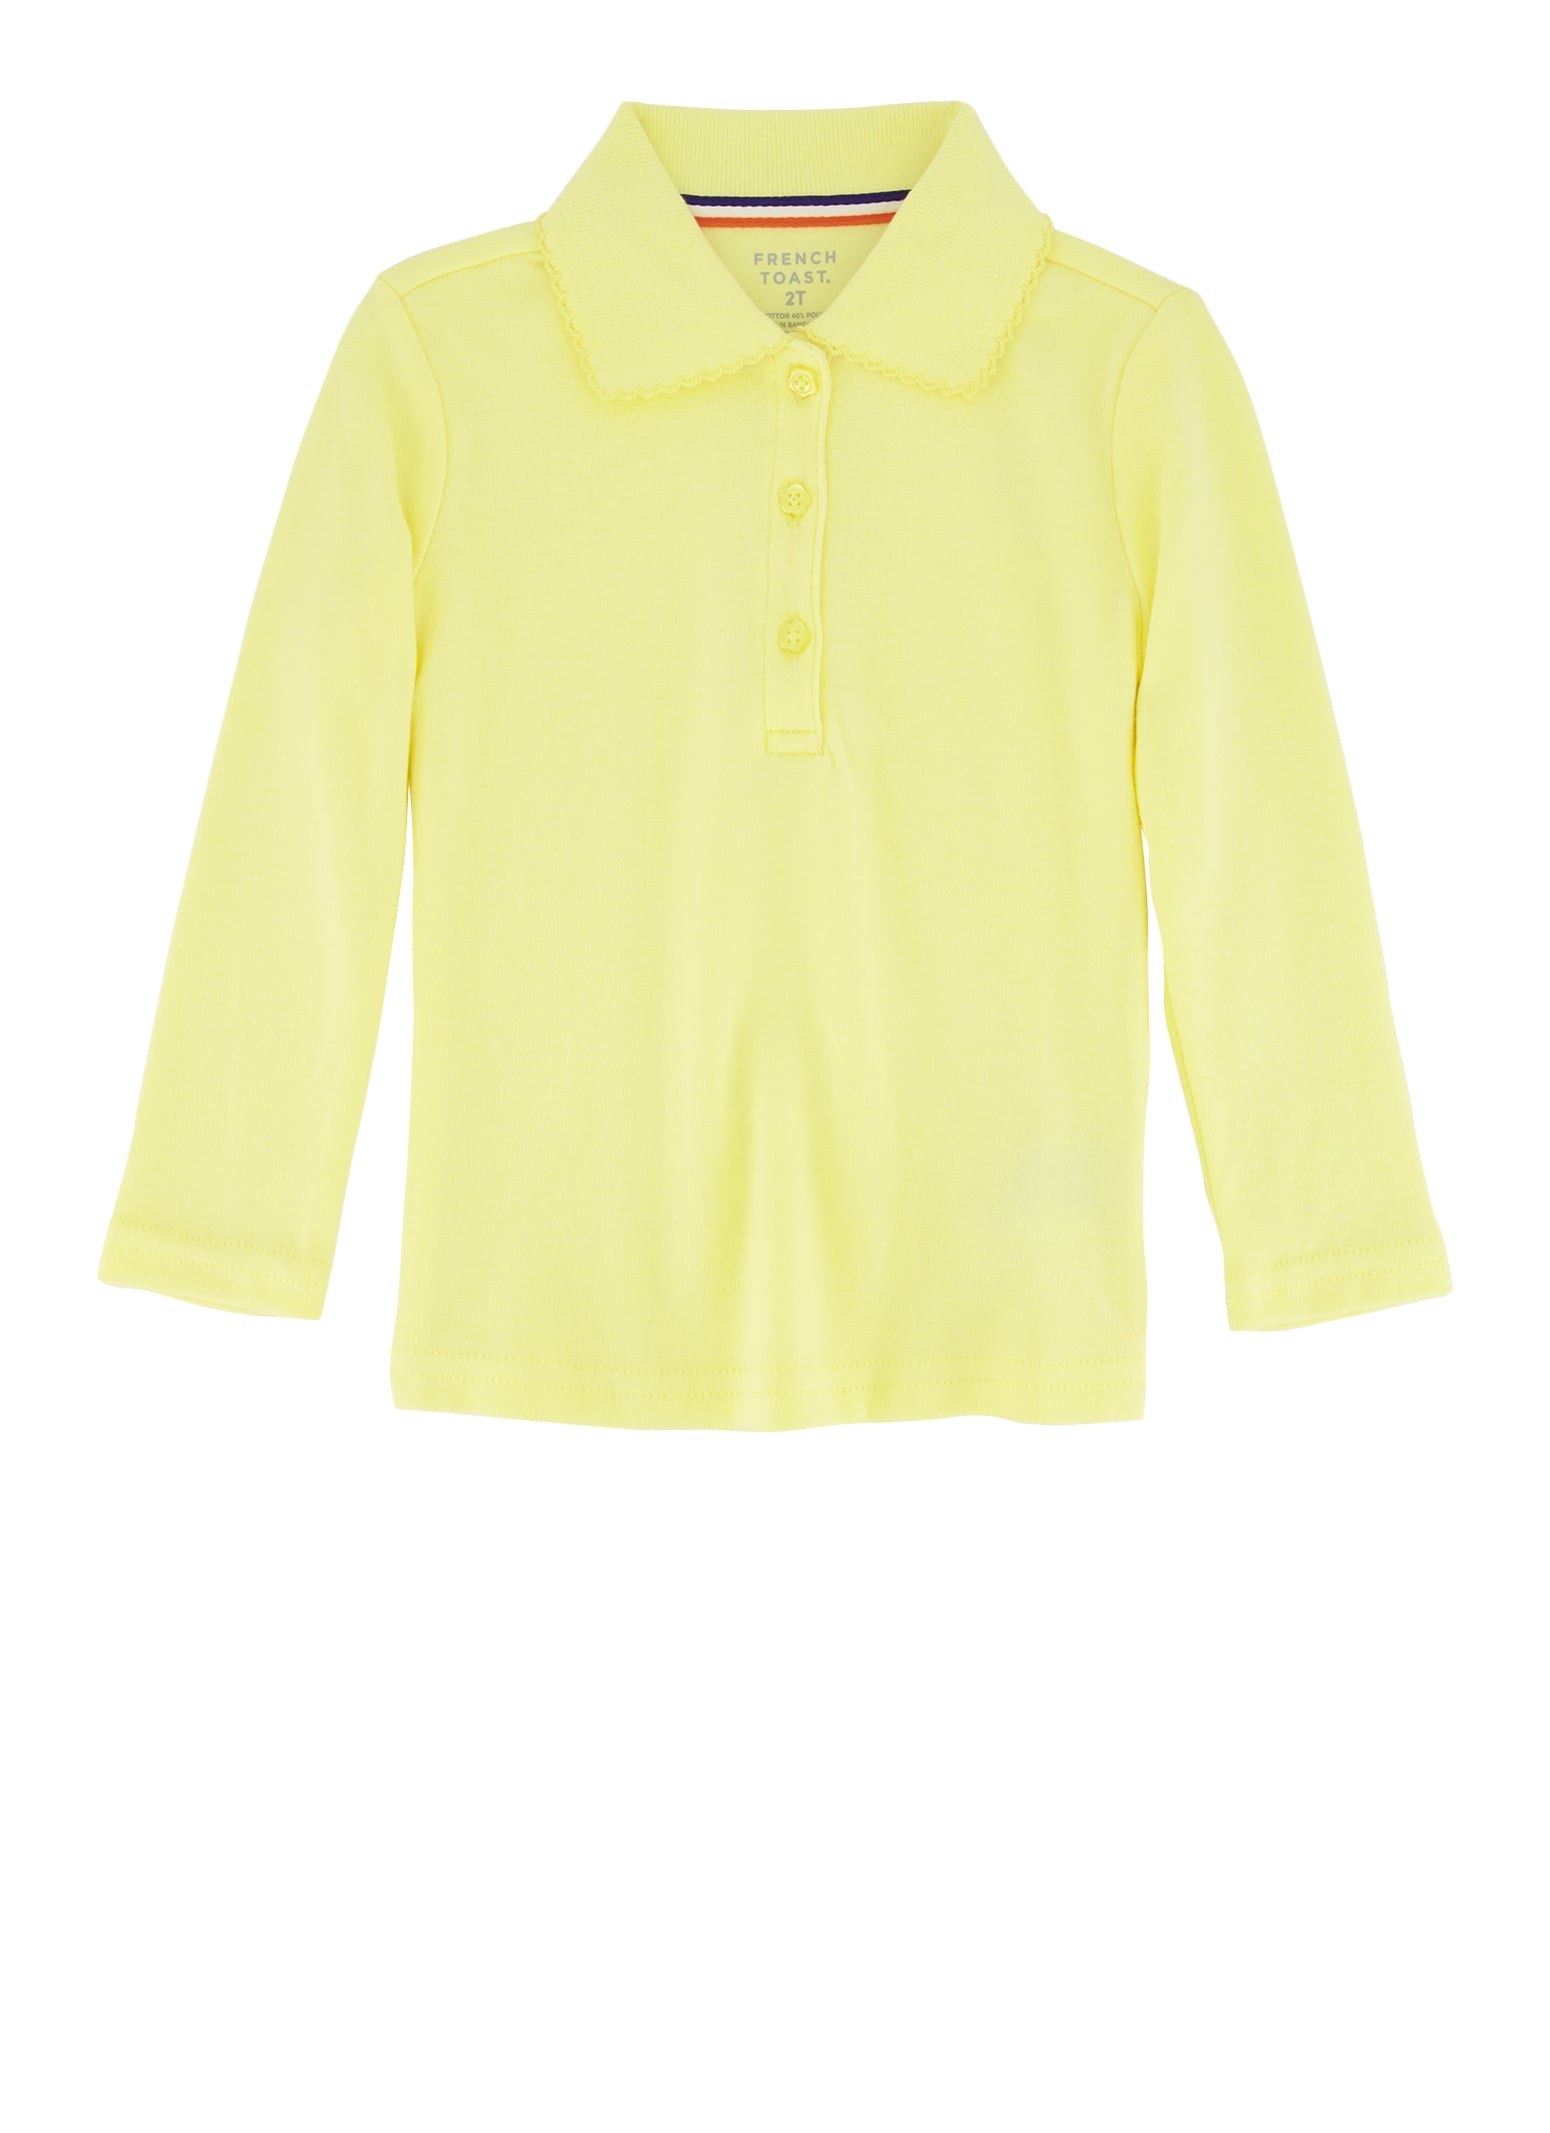 French Toast Girls 2T-4T Long Sleeve Polo Shirt, Yellow, Size 3T